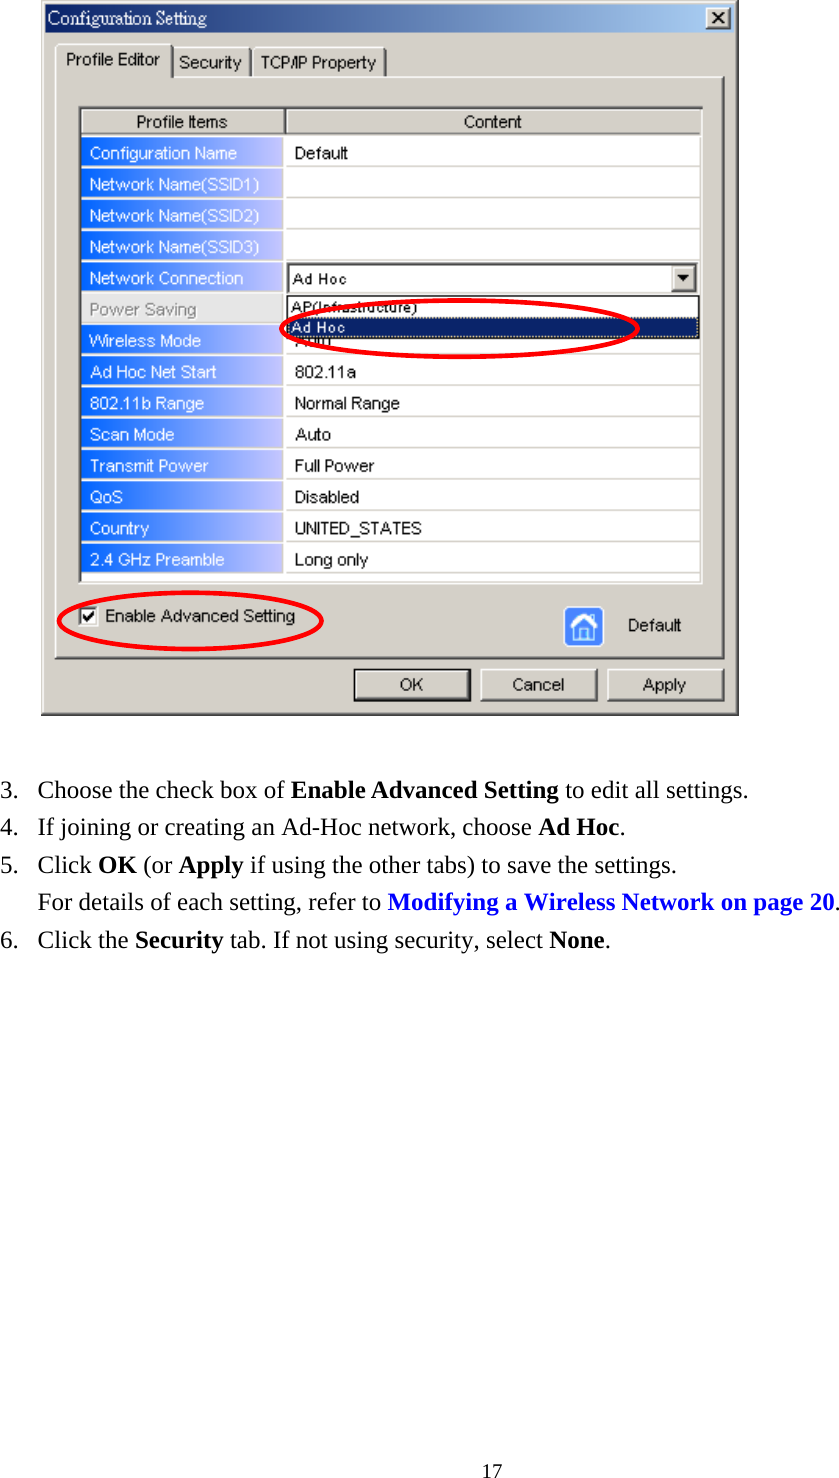  17  3.  Choose the check box of Enable Advanced Setting to edit all settings.   4.  If joining or creating an Ad-Hoc network, choose Ad Hoc. 5. Click OK (or Apply if using the other tabs) to save the settings. For details of each setting, refer to Modifying a Wireless Network on page 20. 6. Click the Security tab. If not using security, select None. 